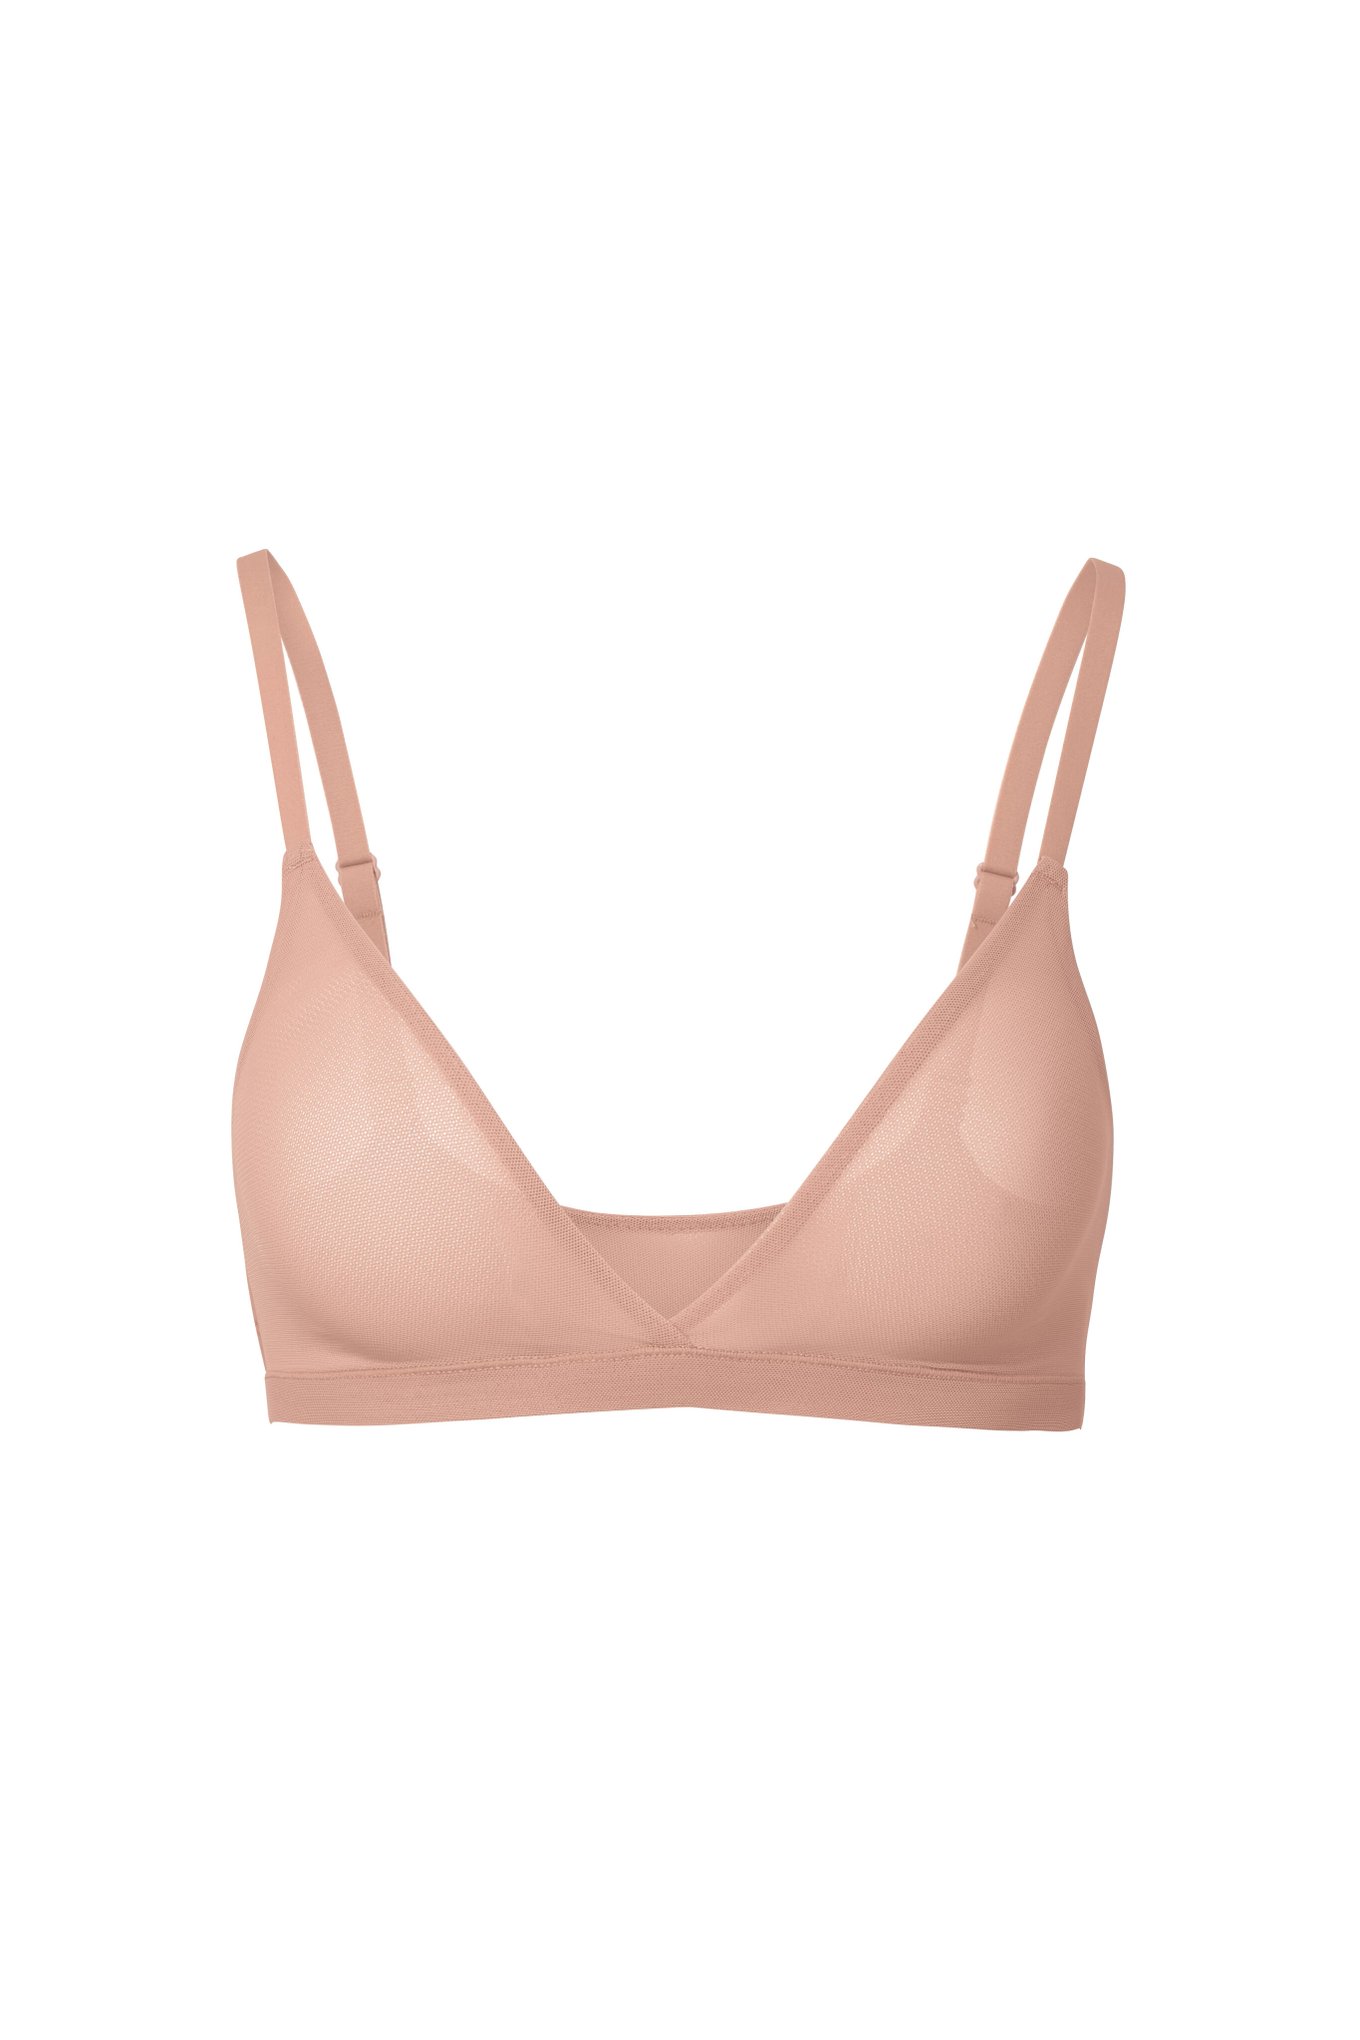 Soma Women's Mesh Triangle Bralette In Light Pink Size Xs